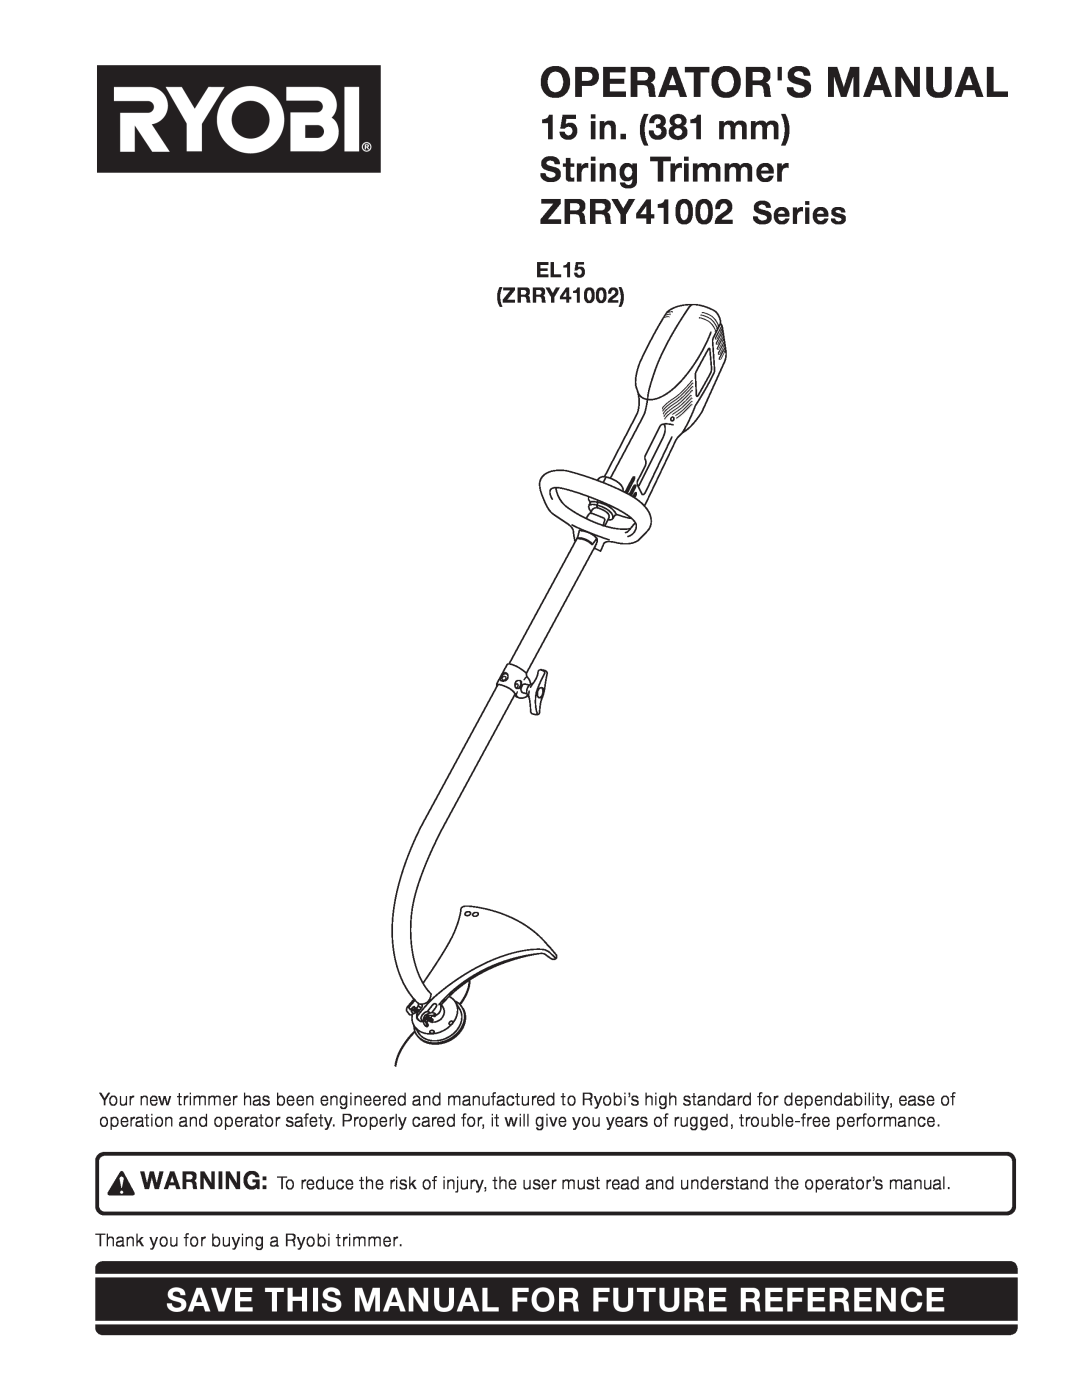 Ryobi Outdoor manual Operators Manual, 15 in. 381 mm String Trimmer ZRRY41002 Series, EL15 ZRRY41002 